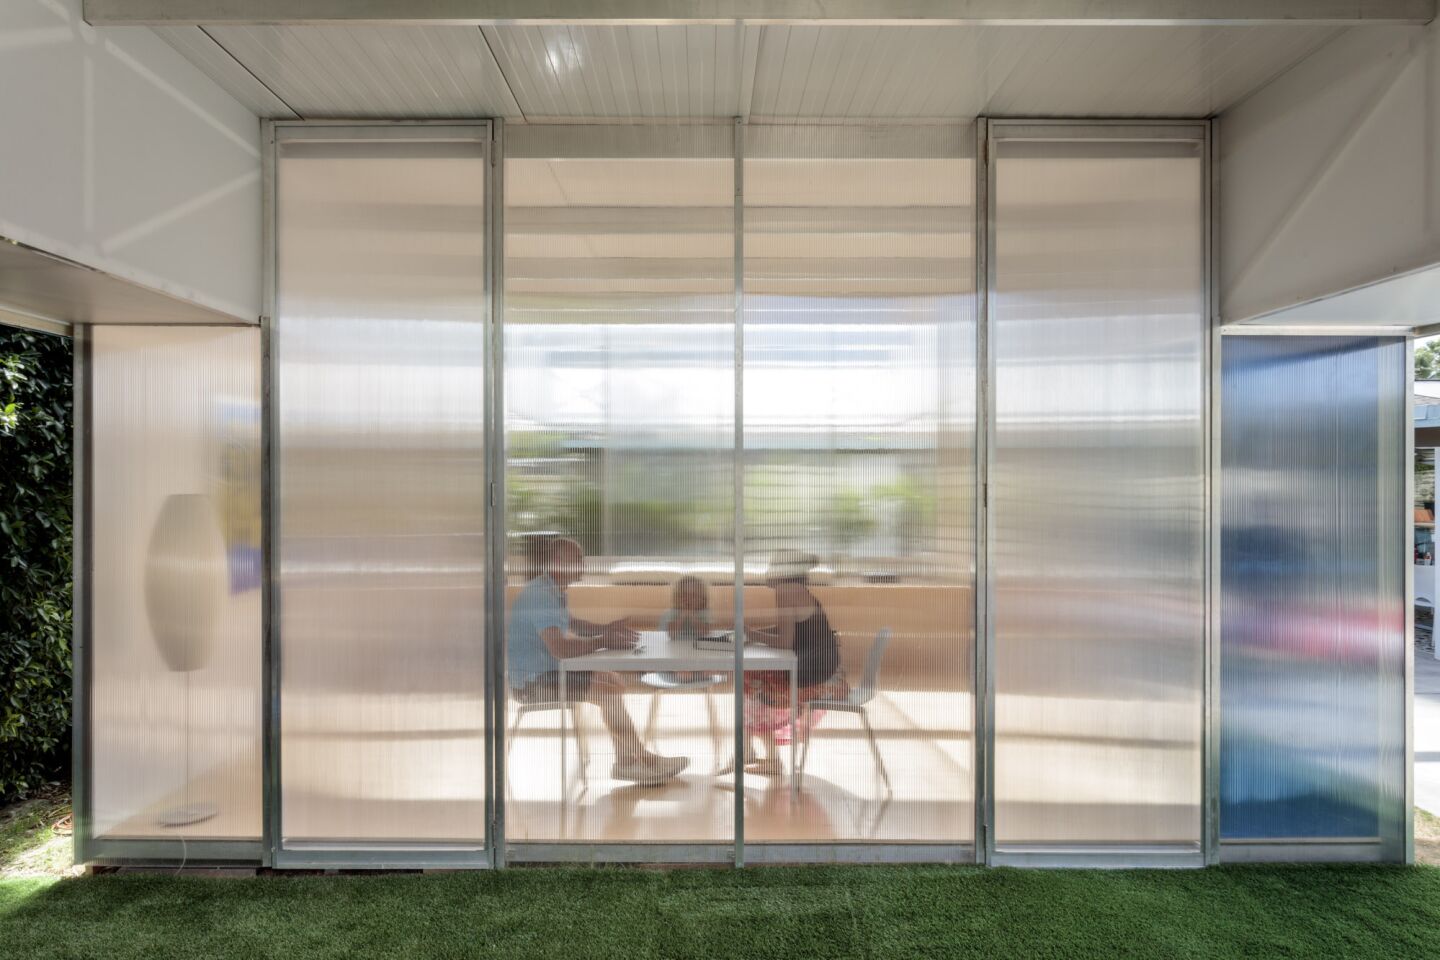 Transparent walls in an ADU by Oasys